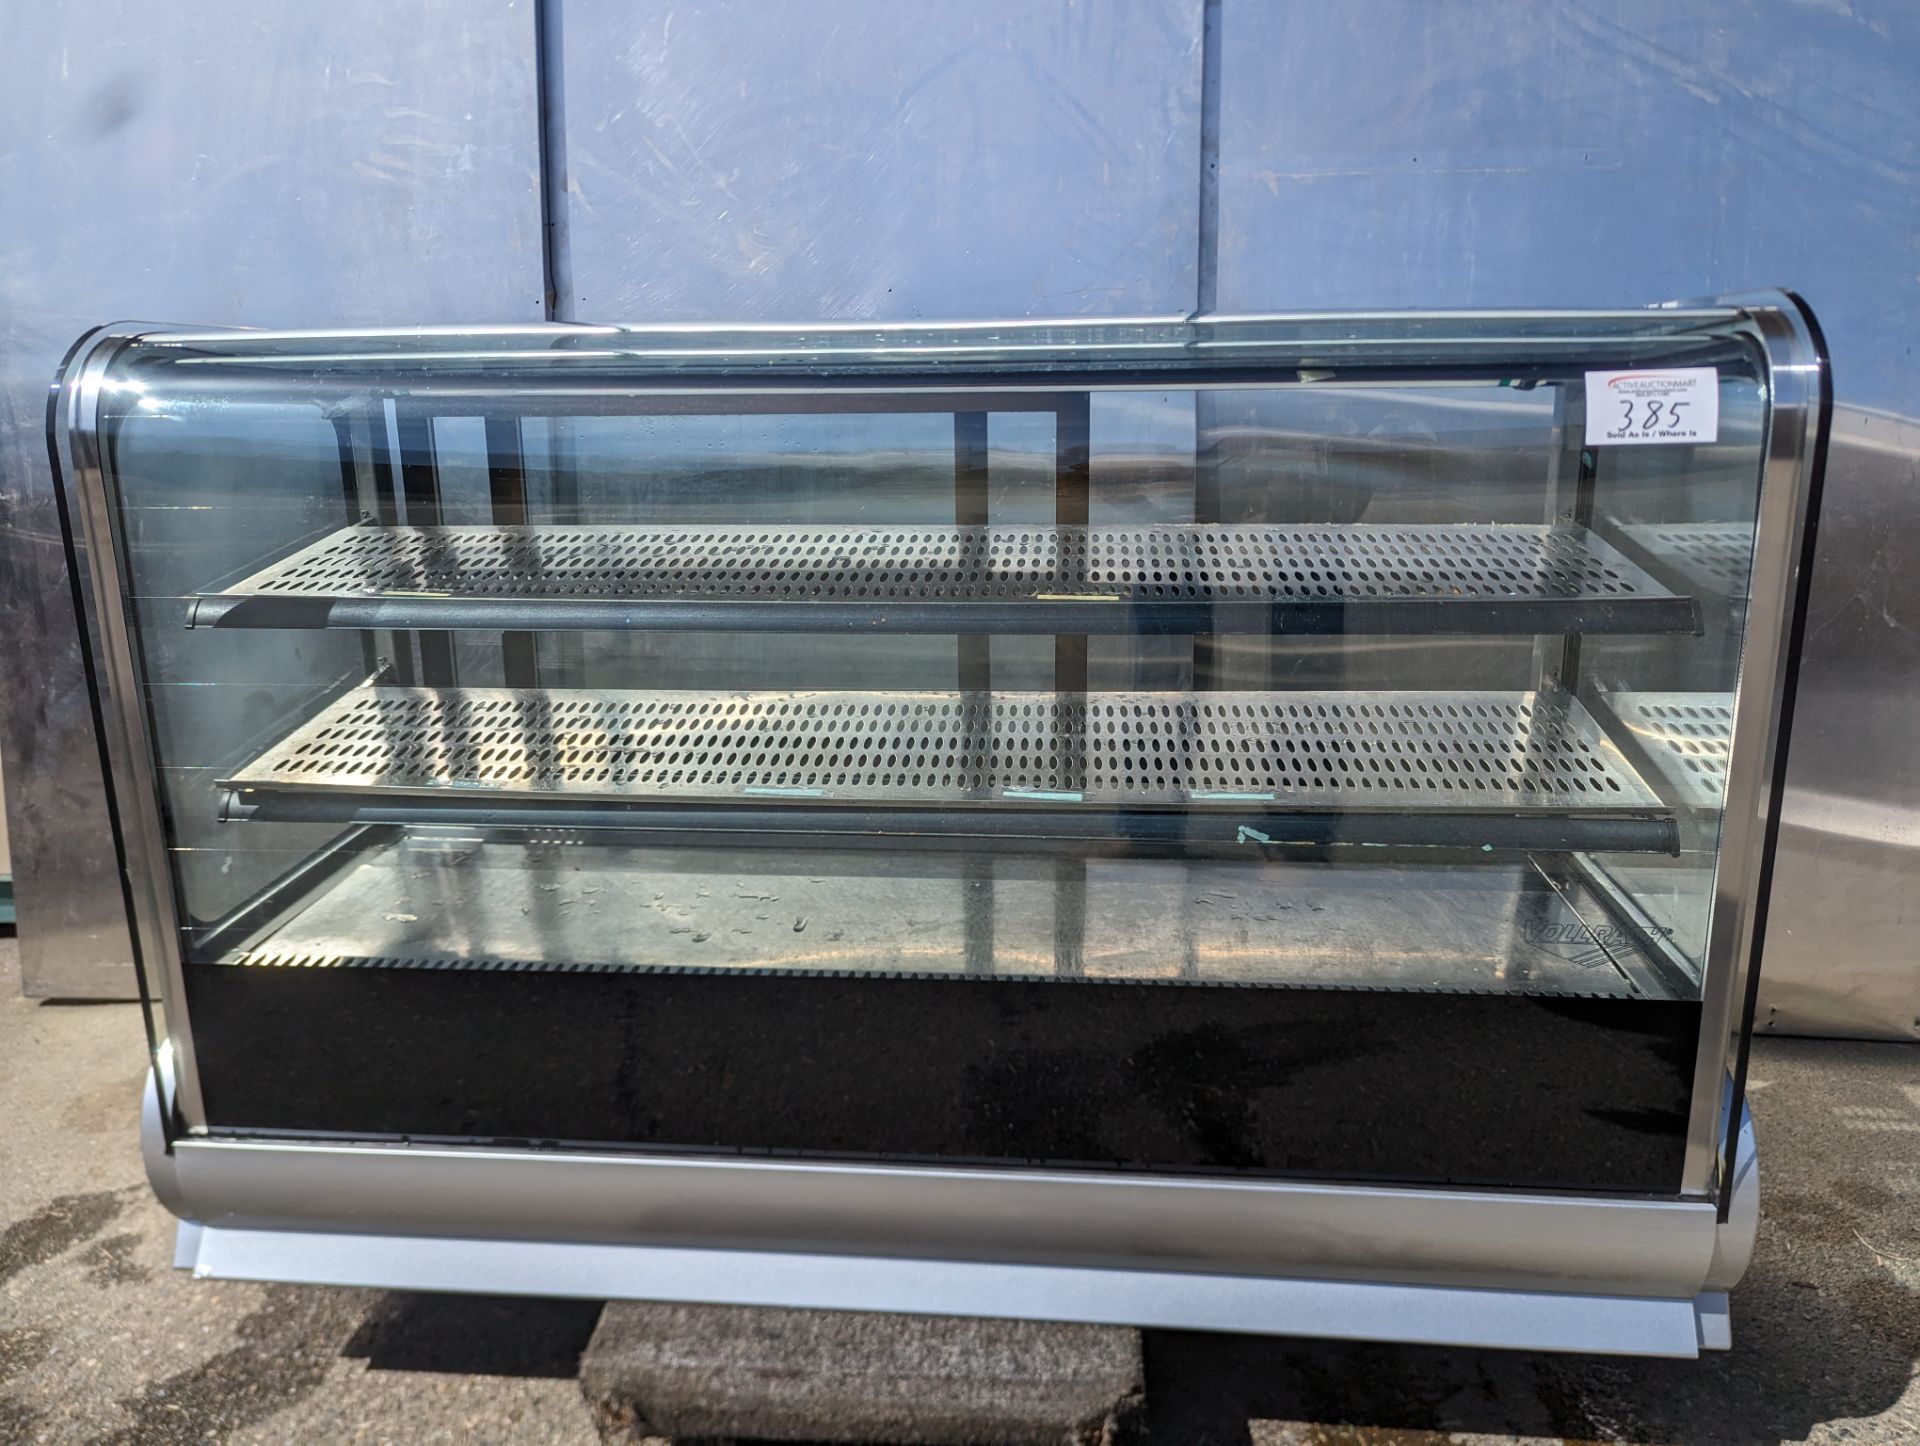 Vollrath 60" Display Cooler - Note Glass Cracked on Top